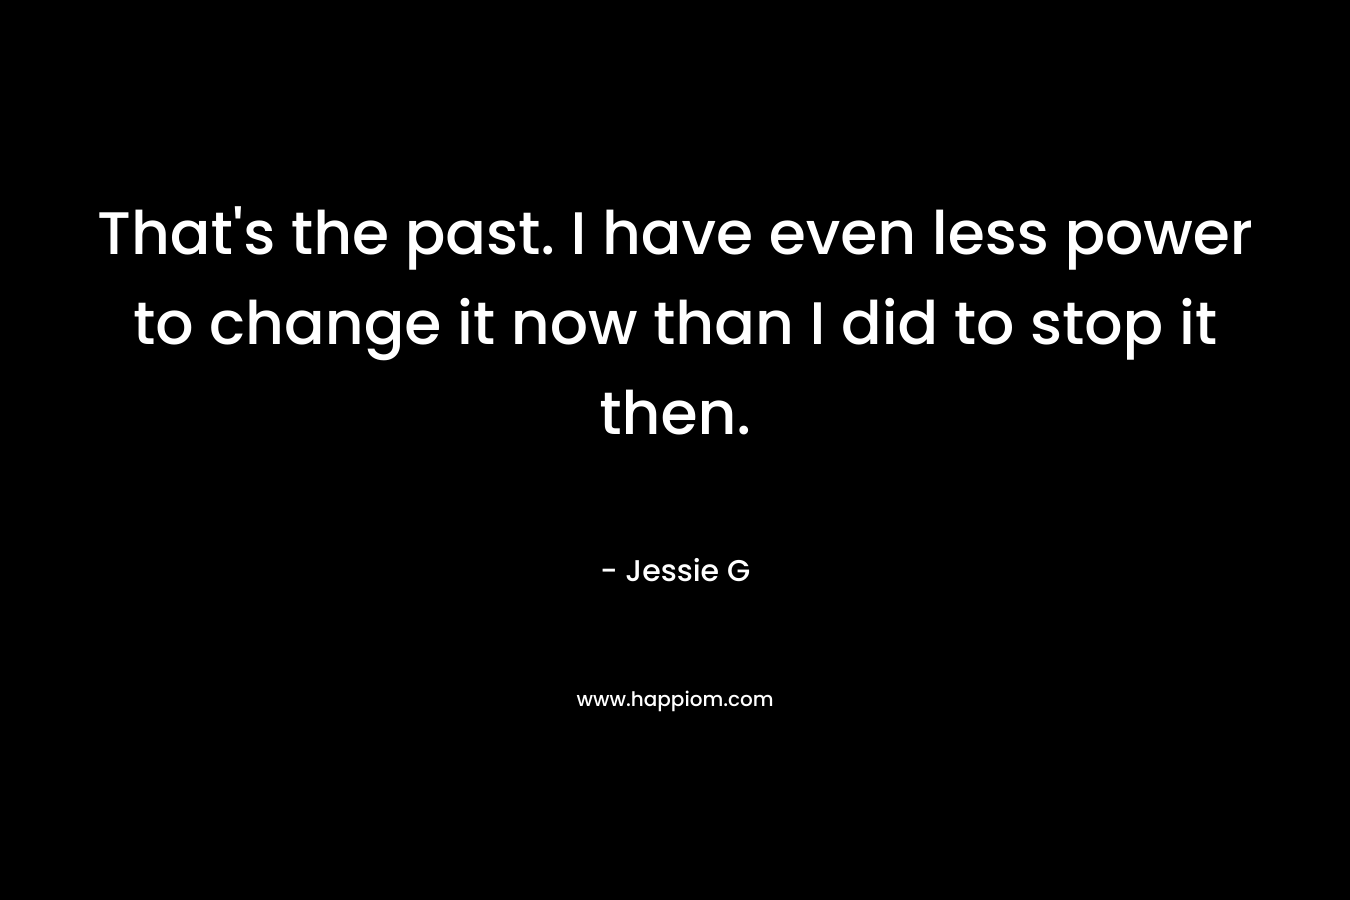 That's the past. I have even less power to change it now than I did to stop it then.